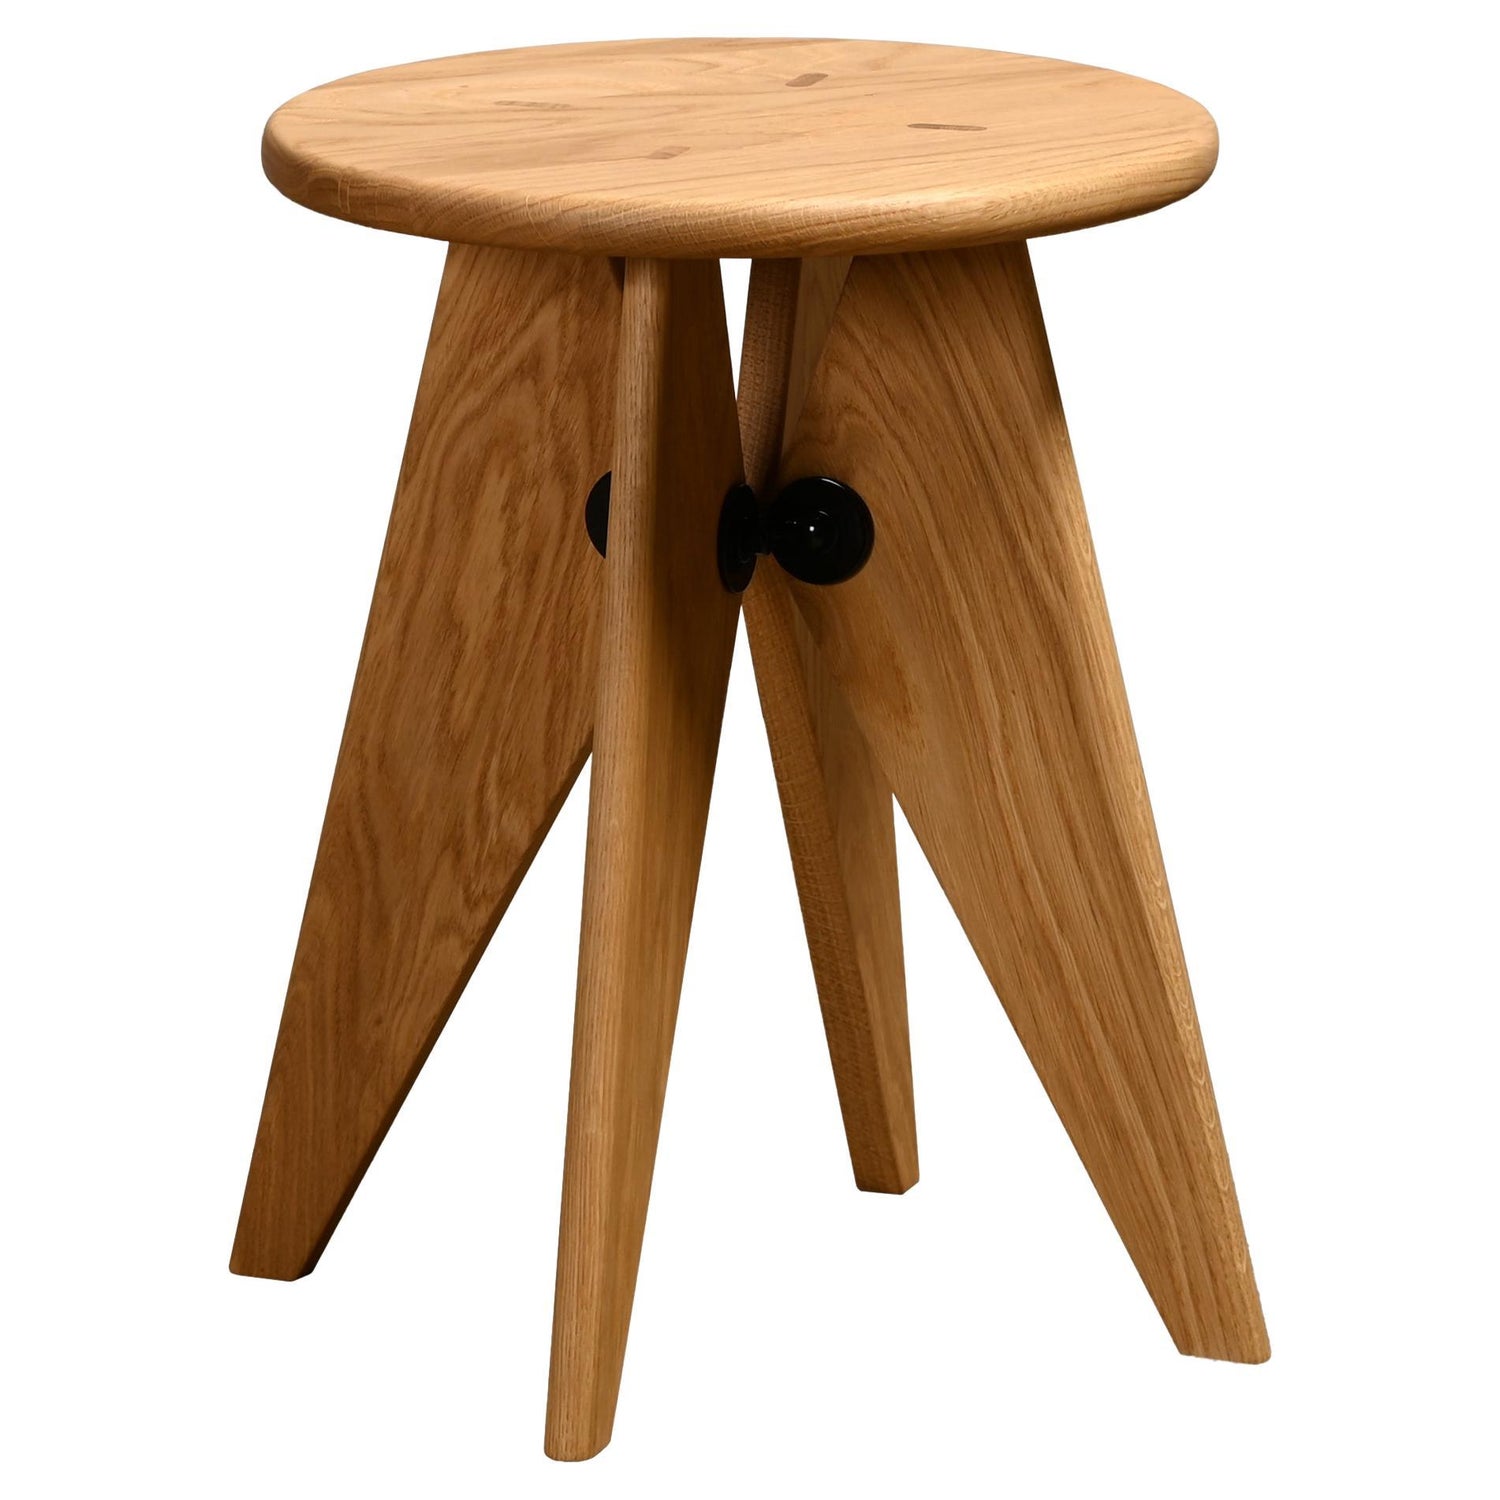 Prouve Tabouret - 6 For Sale on 1stDibs